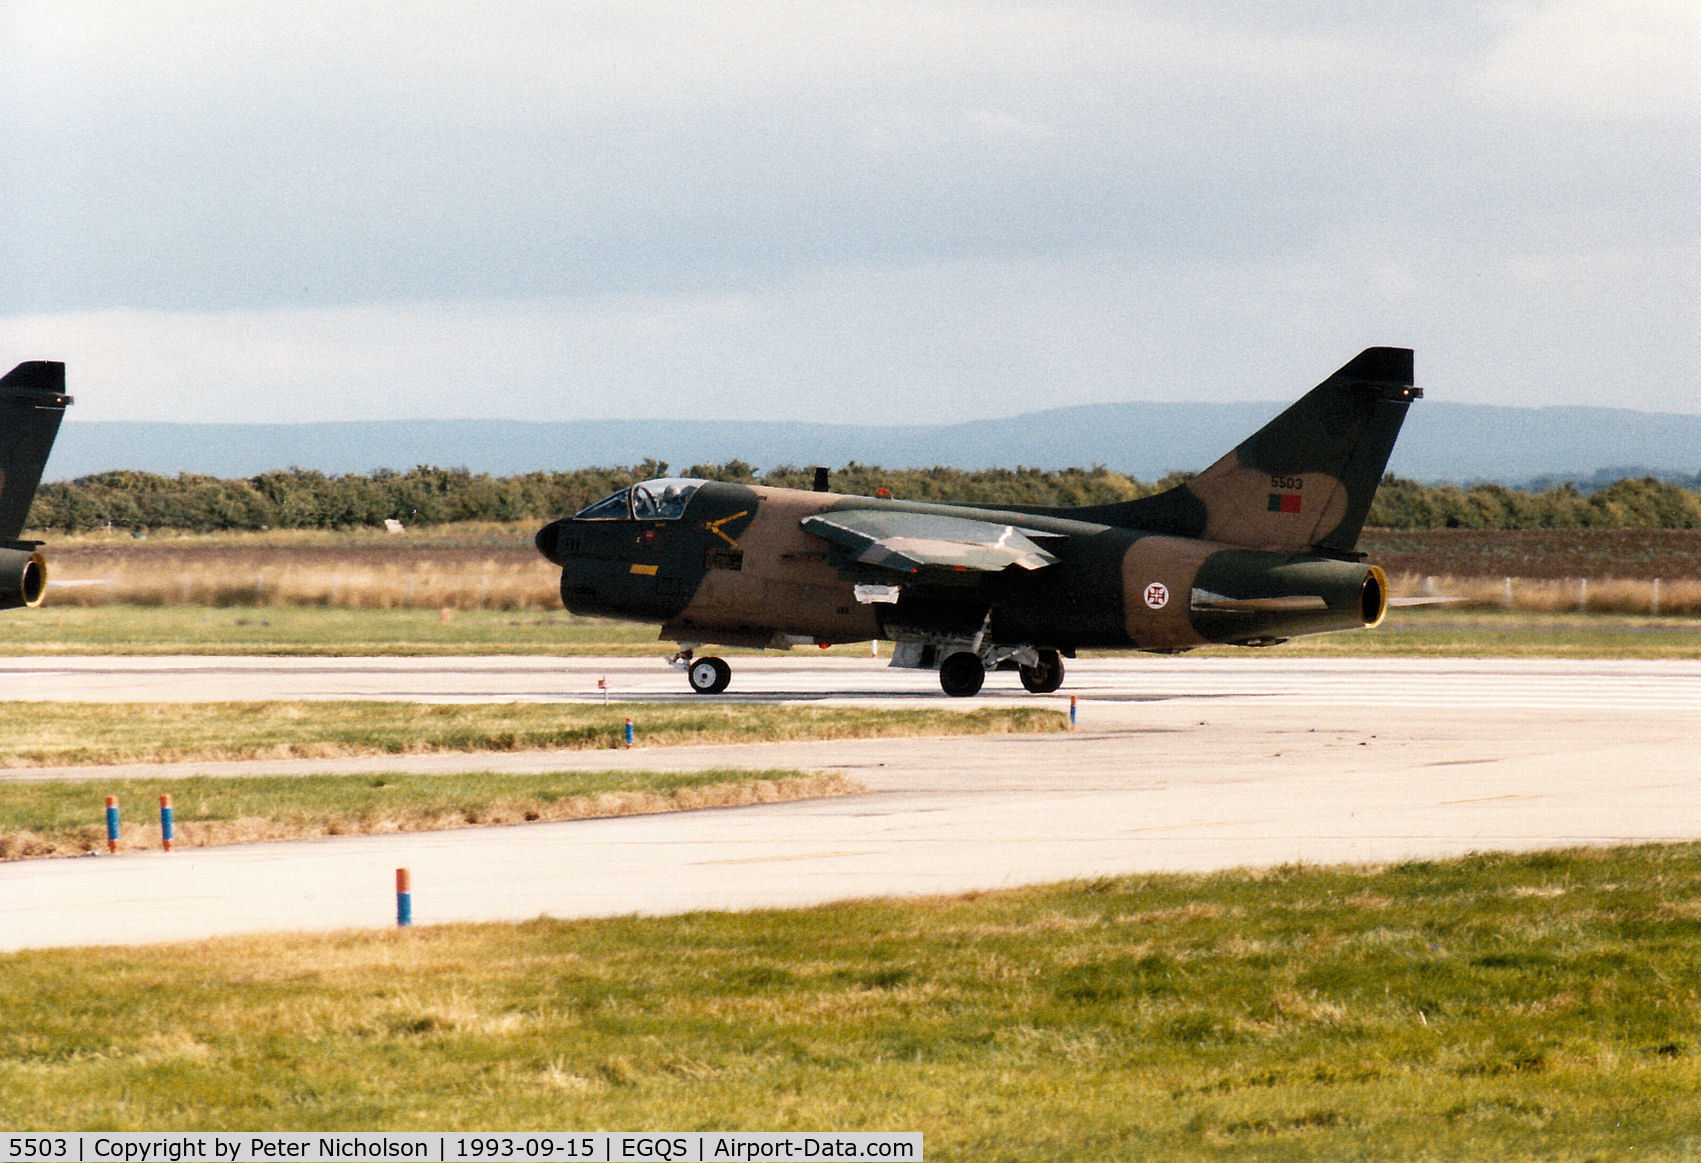 5503, LTV A-7P Corsair II C/N A-182/P-003, Portuguese Air Force A-7P Corsair II of 304 Esquadron preparing for take-off on Runway 05 at RAF Lossiemouth in the Summer of 1993.